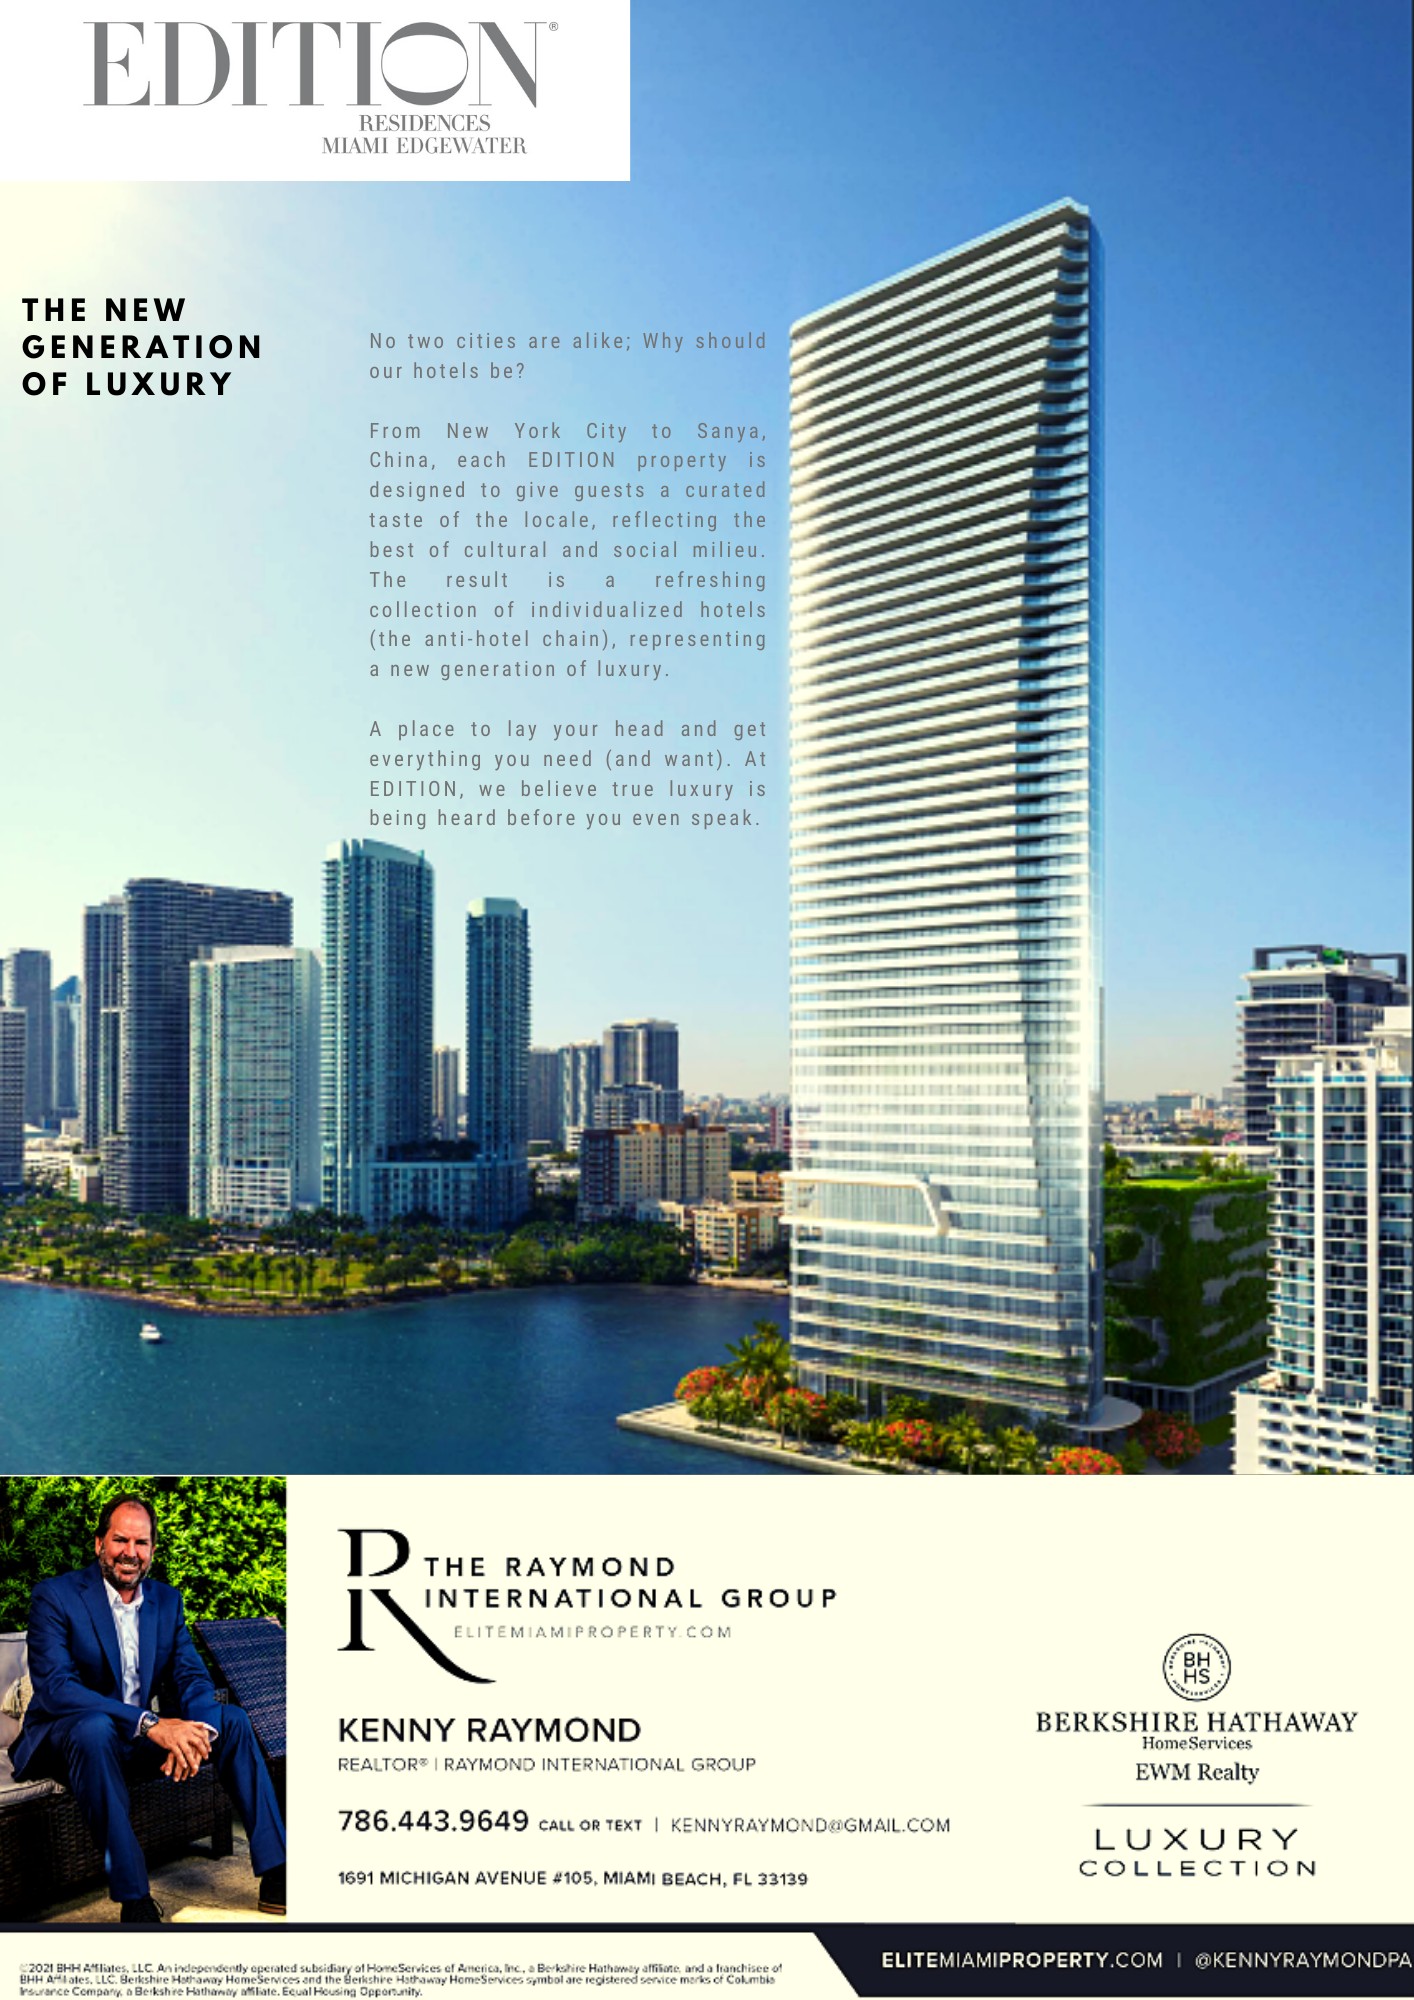 Edition Residences